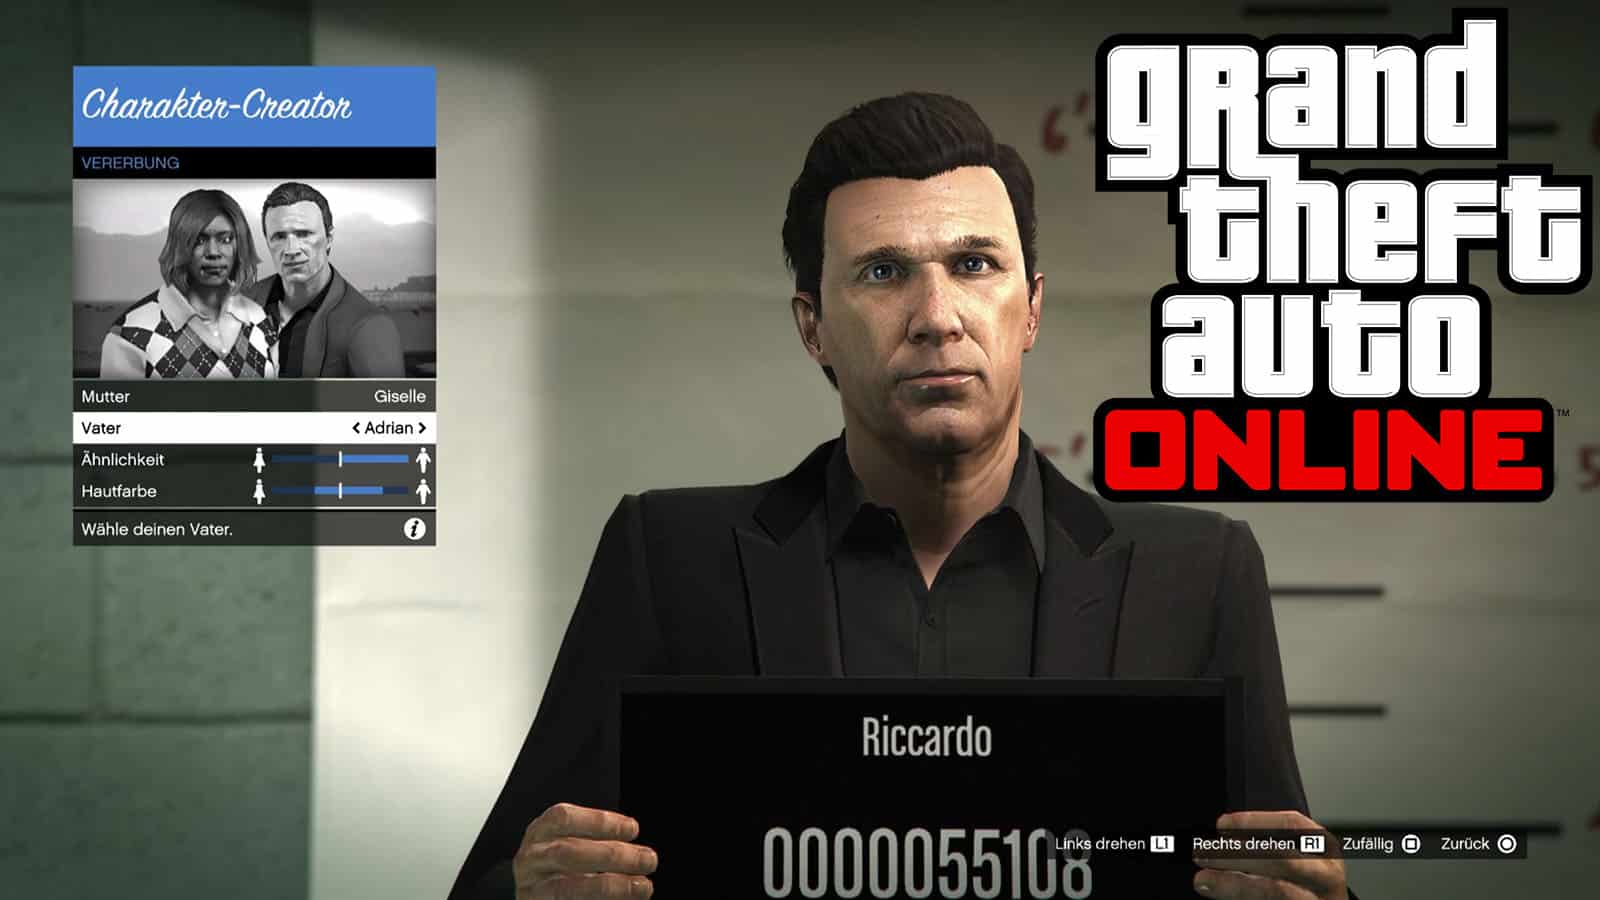 Character creation in GTA ONline